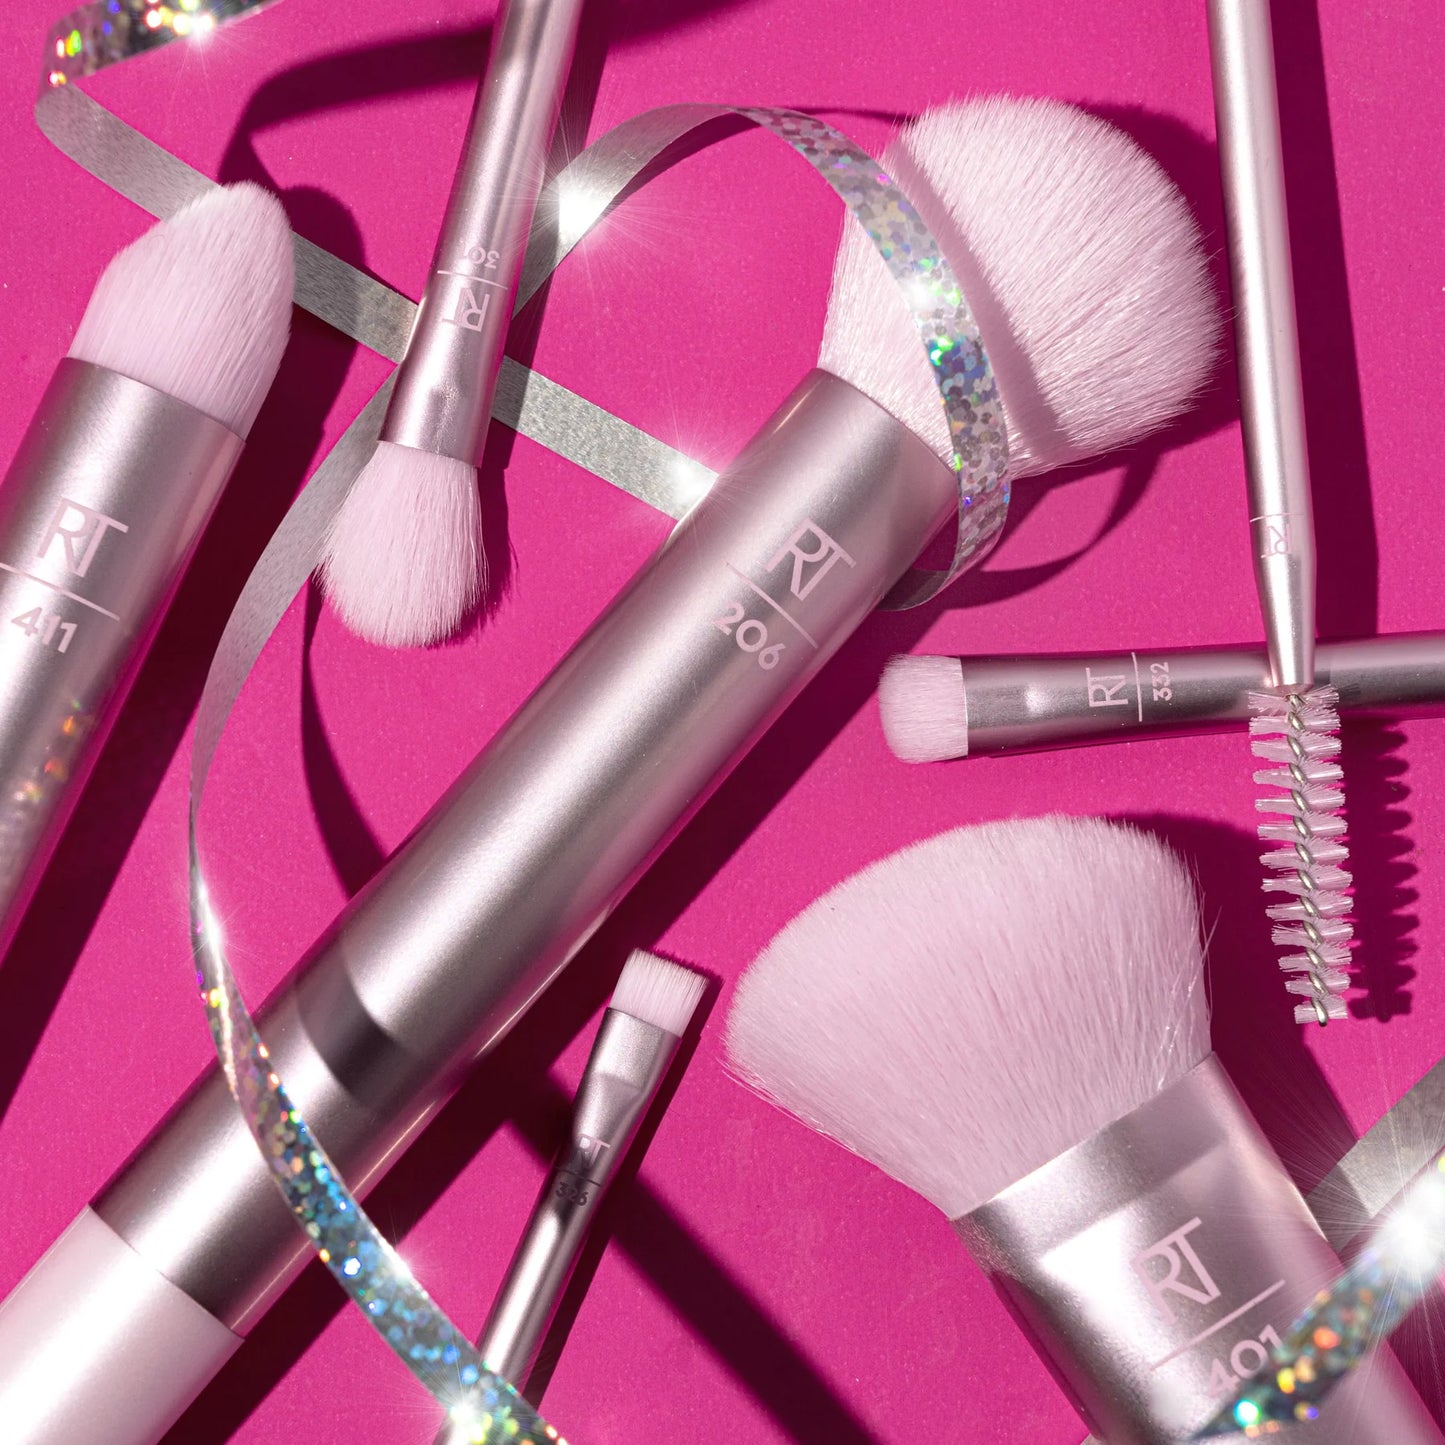 Real Techniques Light Up the Night Brush Set Limited Edition